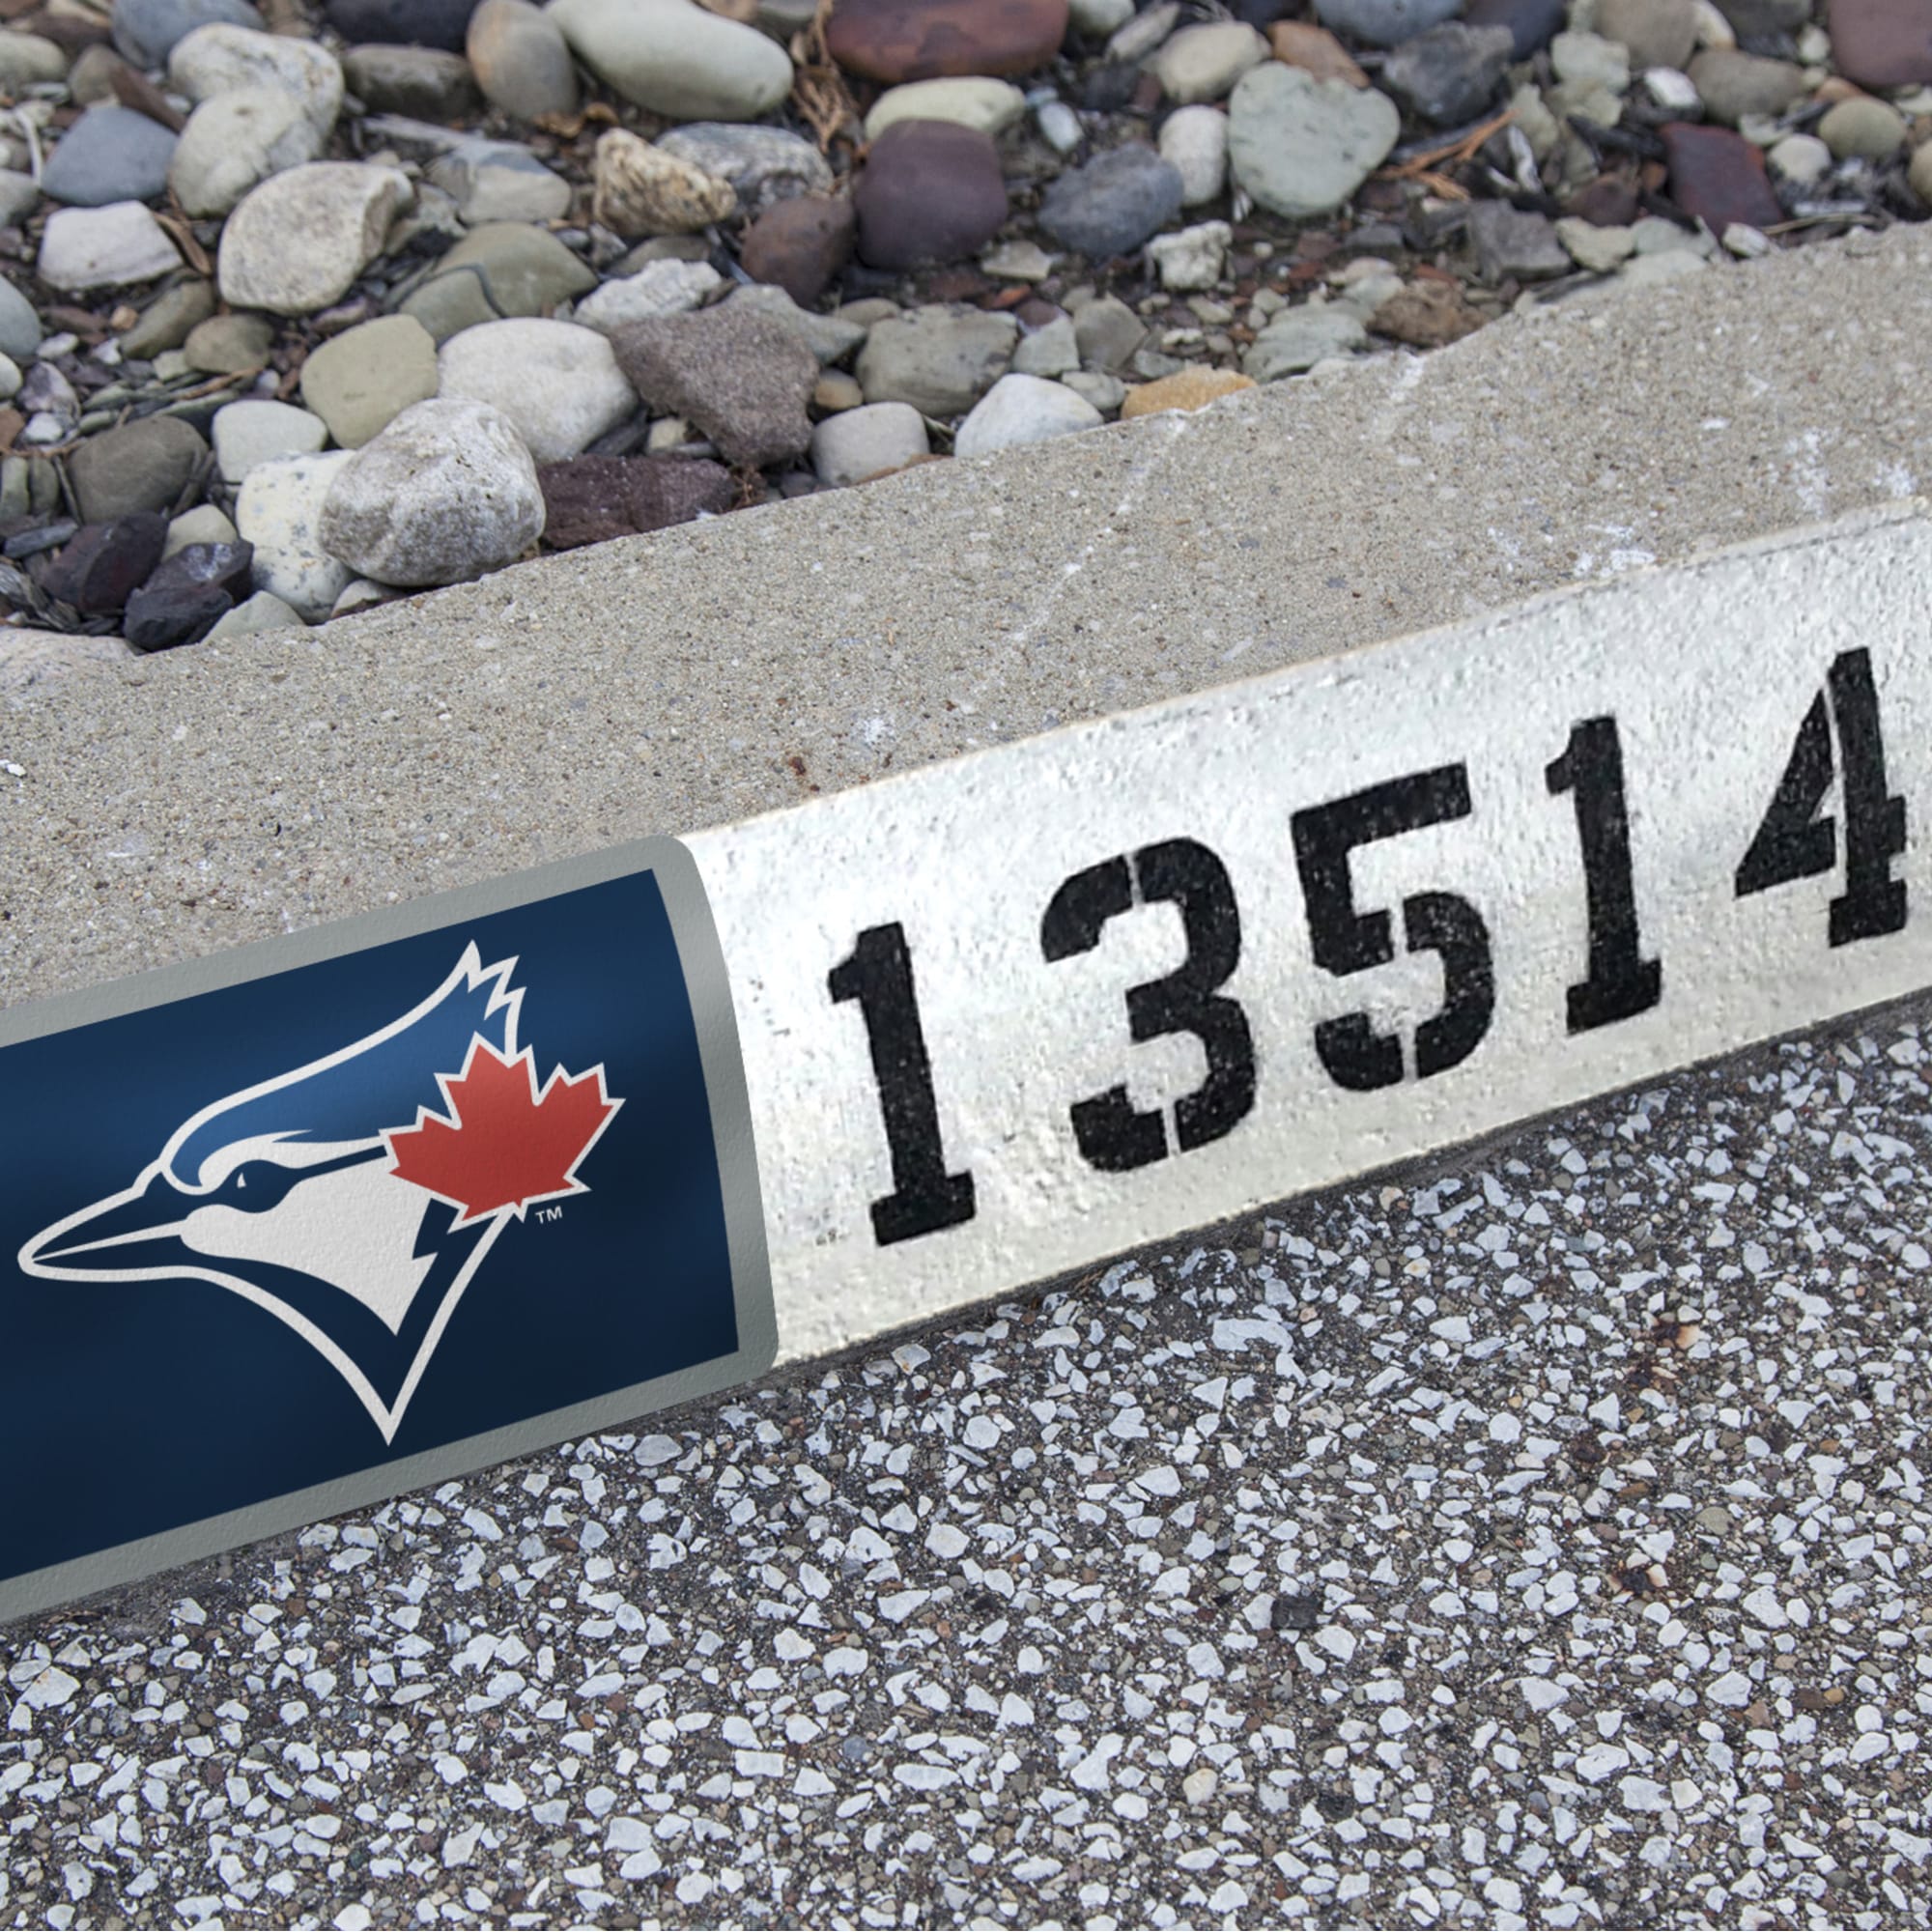 Toronto Blue Jays: Address Block - Officially Licensed MLB Outdoor Graphic 6.0"W x 8.0"H by Fathead | Wood/Aluminum